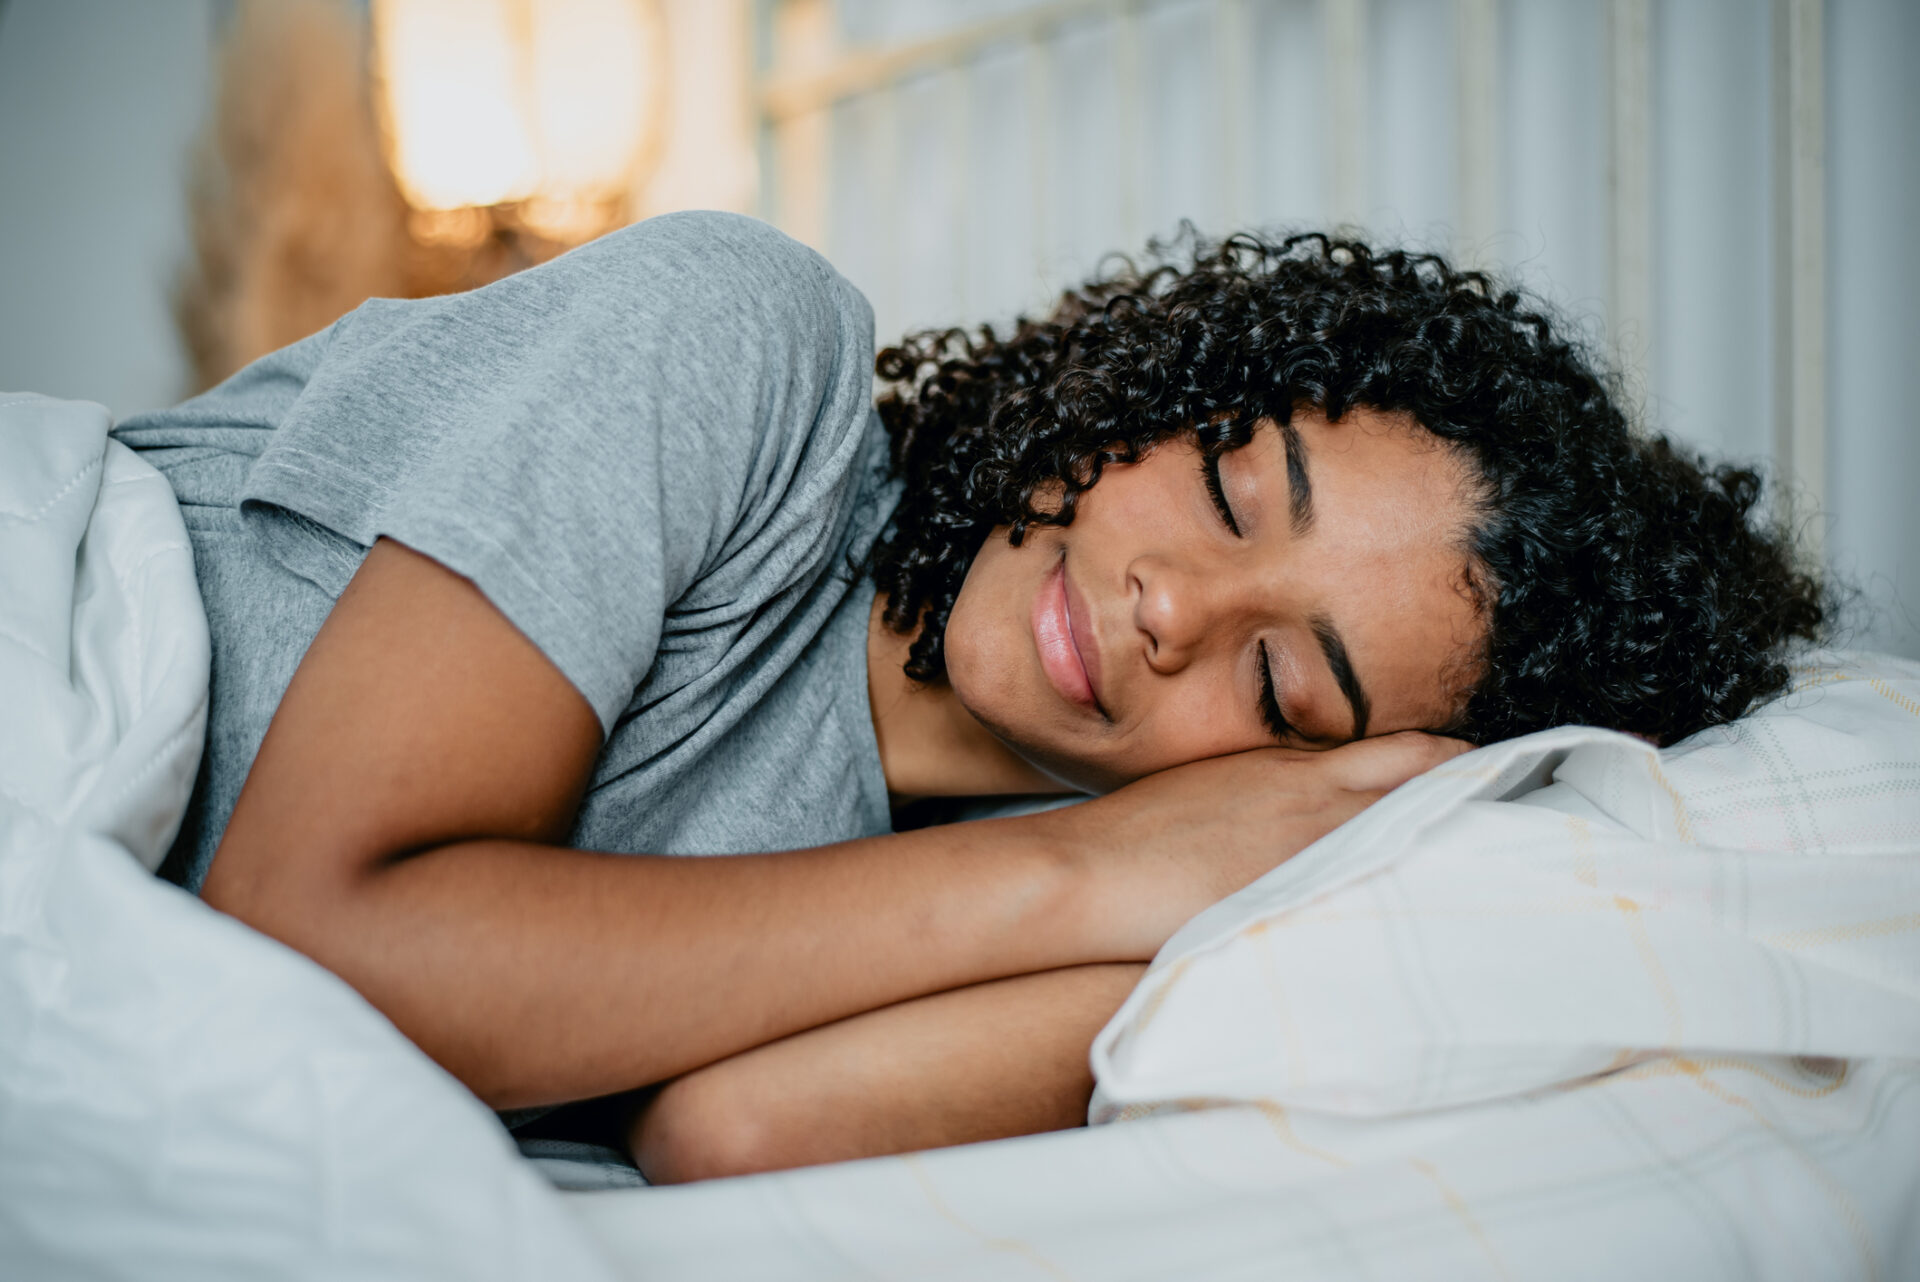 Curly-haired Black woman sleeps soundly on her side in bed after sleep apnea treatment